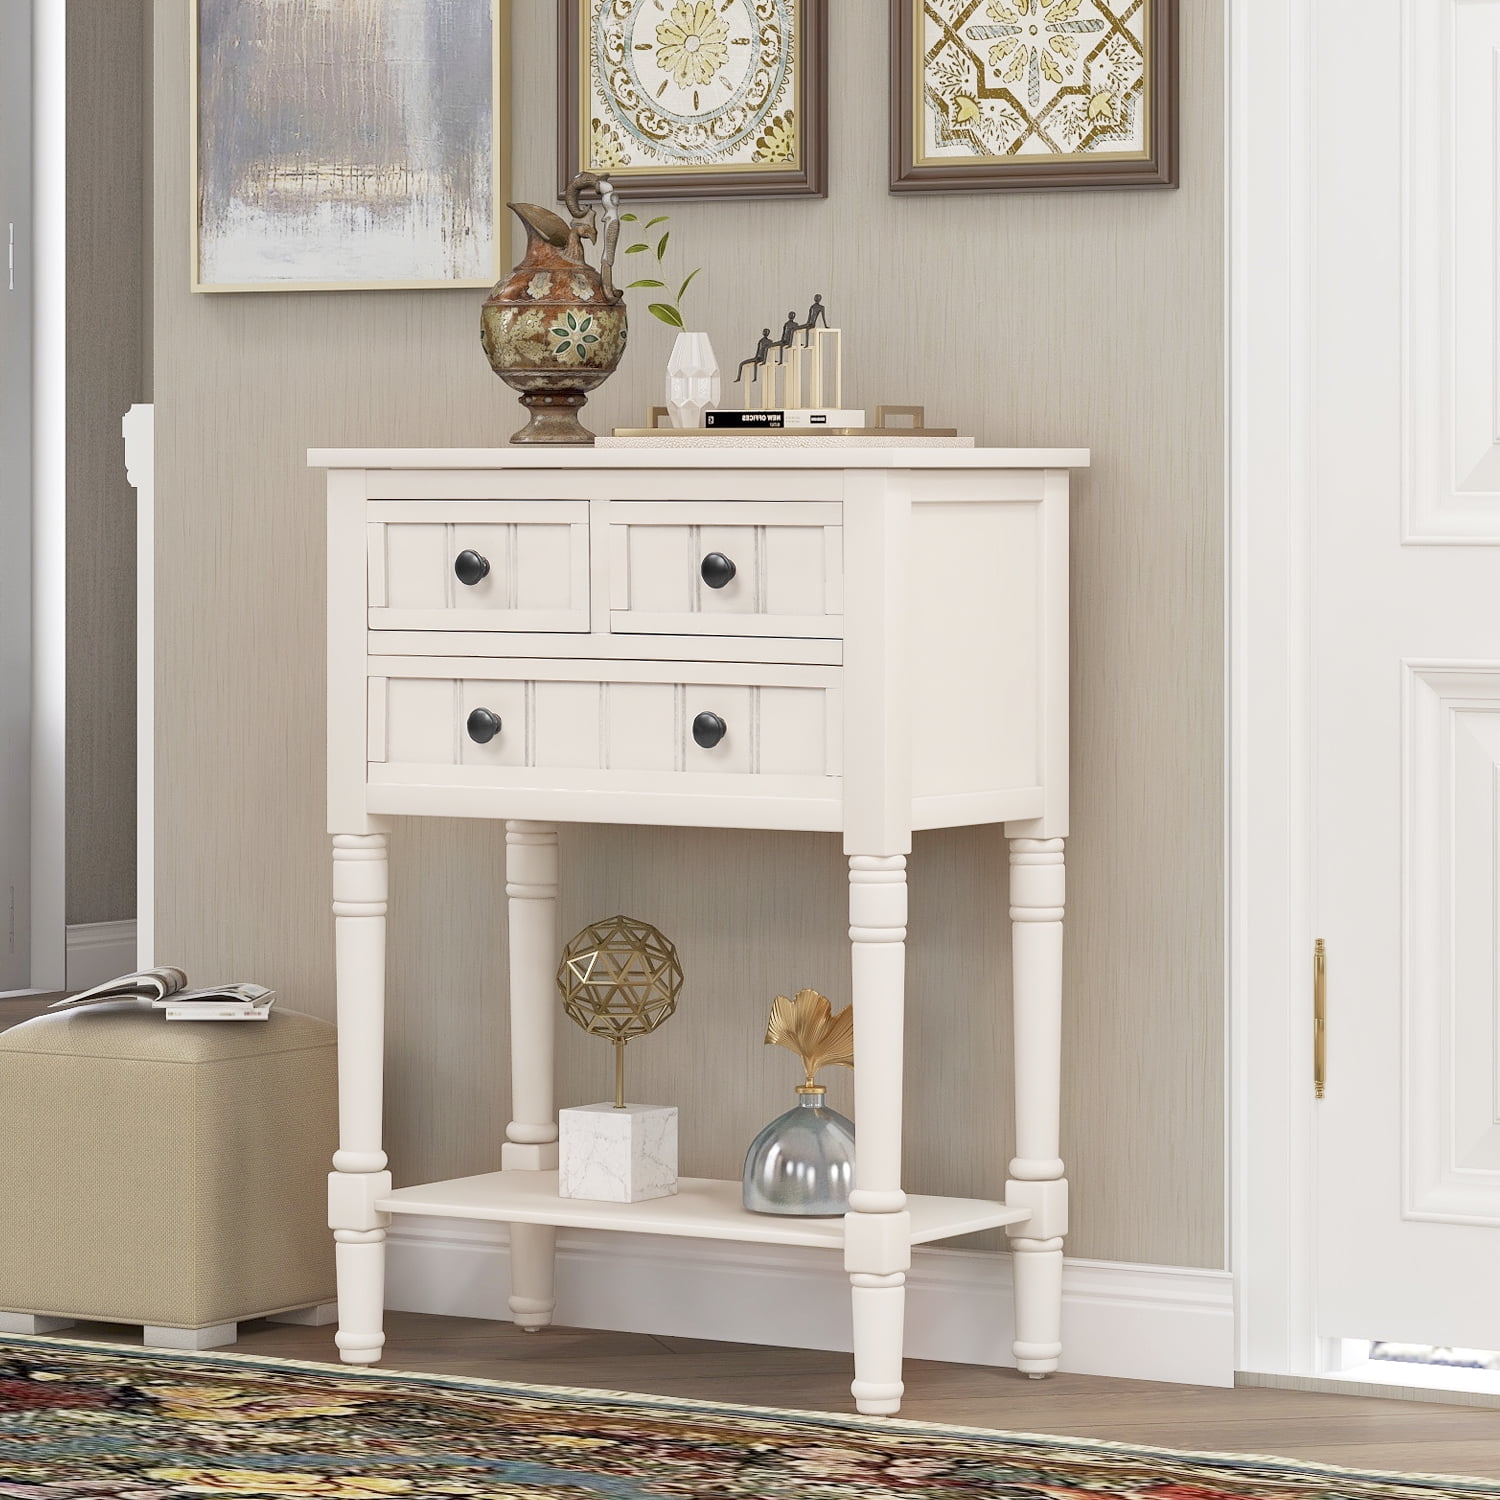 Entryway Table Contemporary Console, Narrow Console Cabinet White